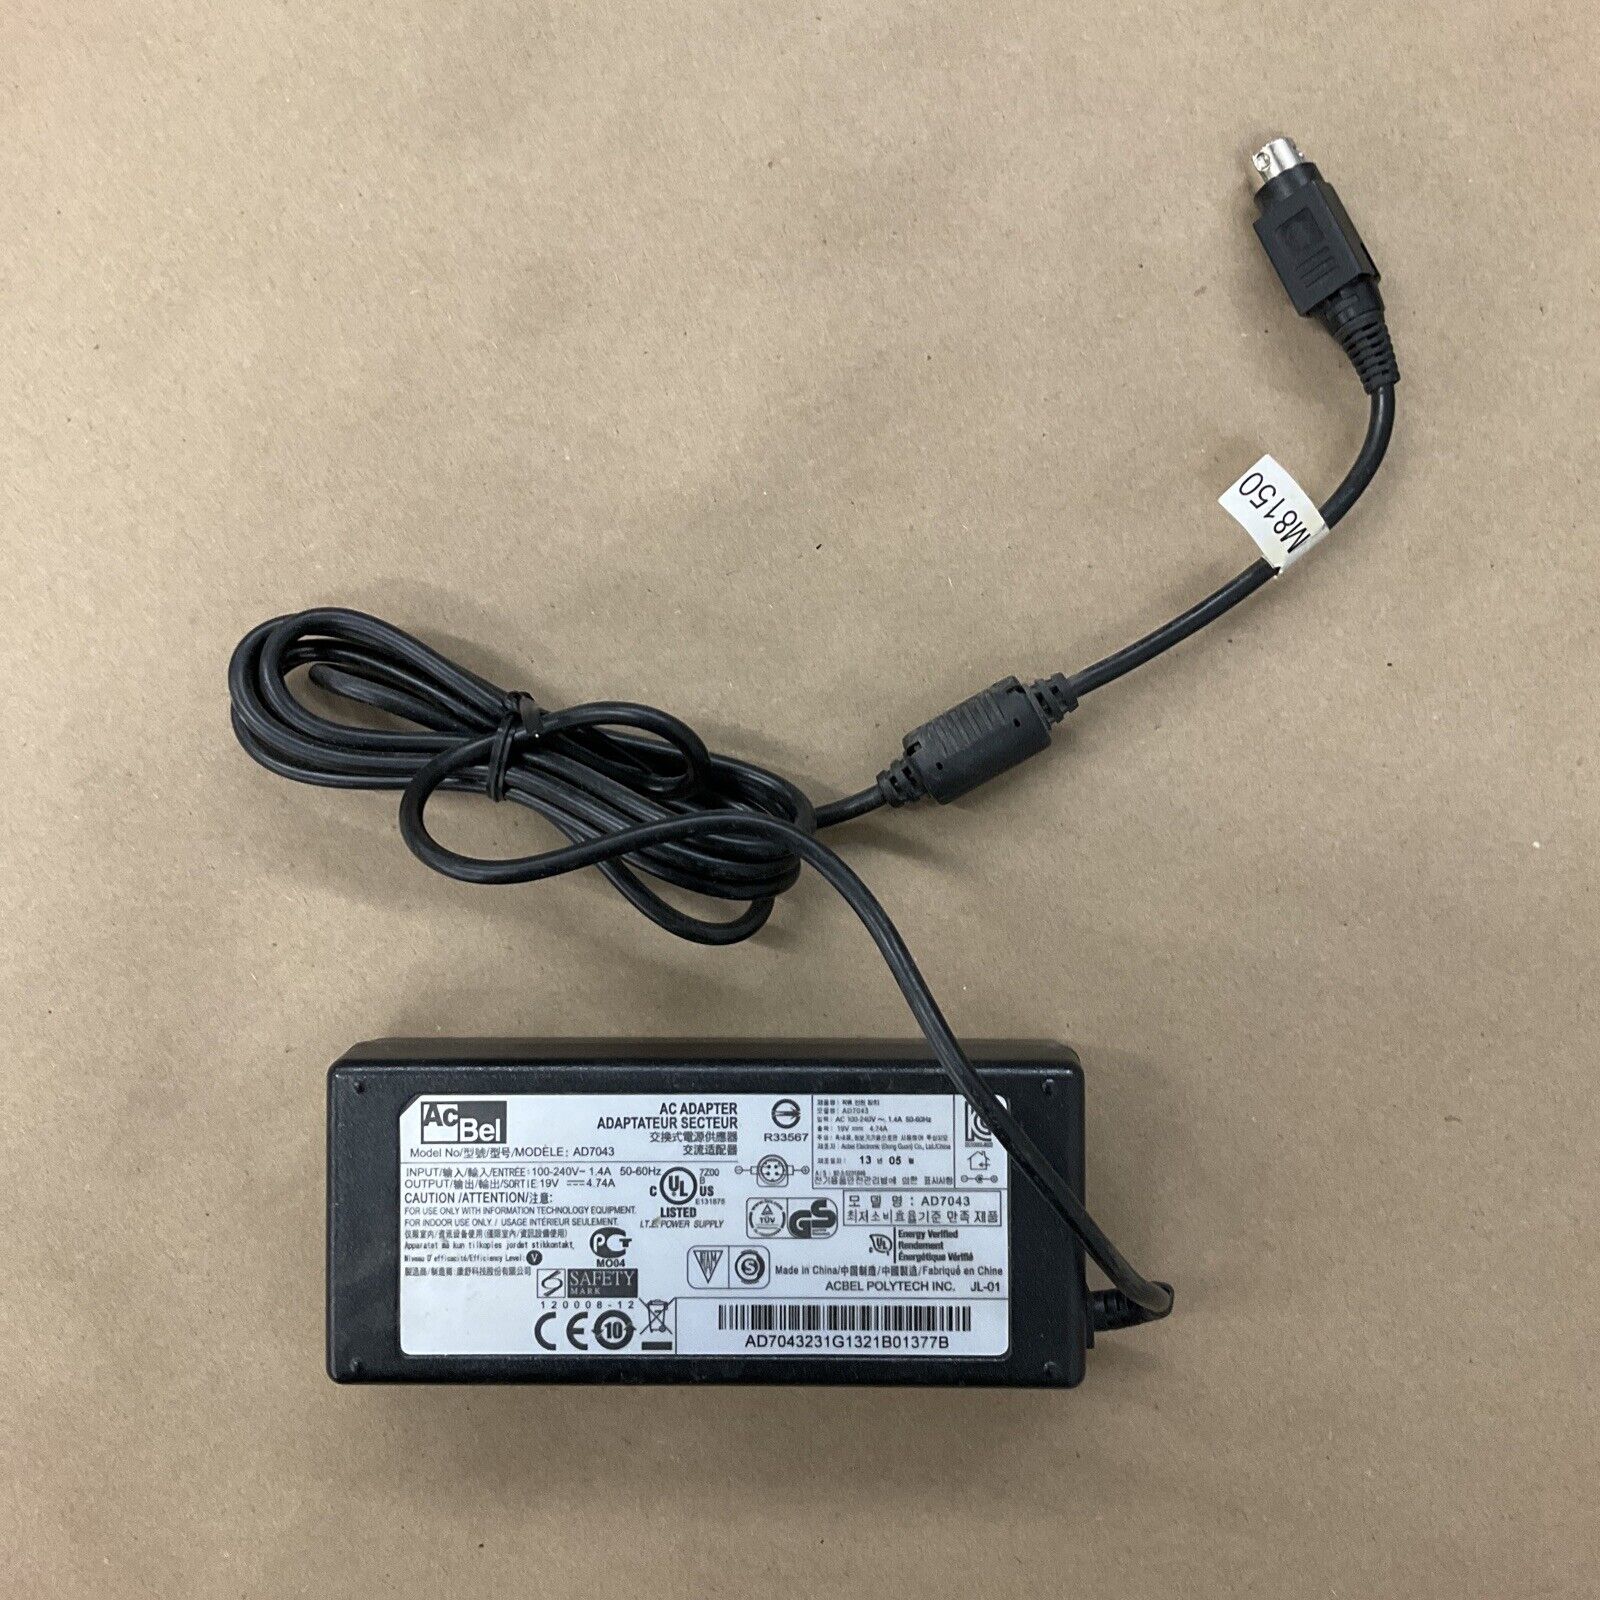 AC/DC Adapter Charger Battery lead PSU for AcBel AD7043 I.T.E. Power Supply Cord Brand AcBel Type AC/DC Adapter Feature - Click Image to Close